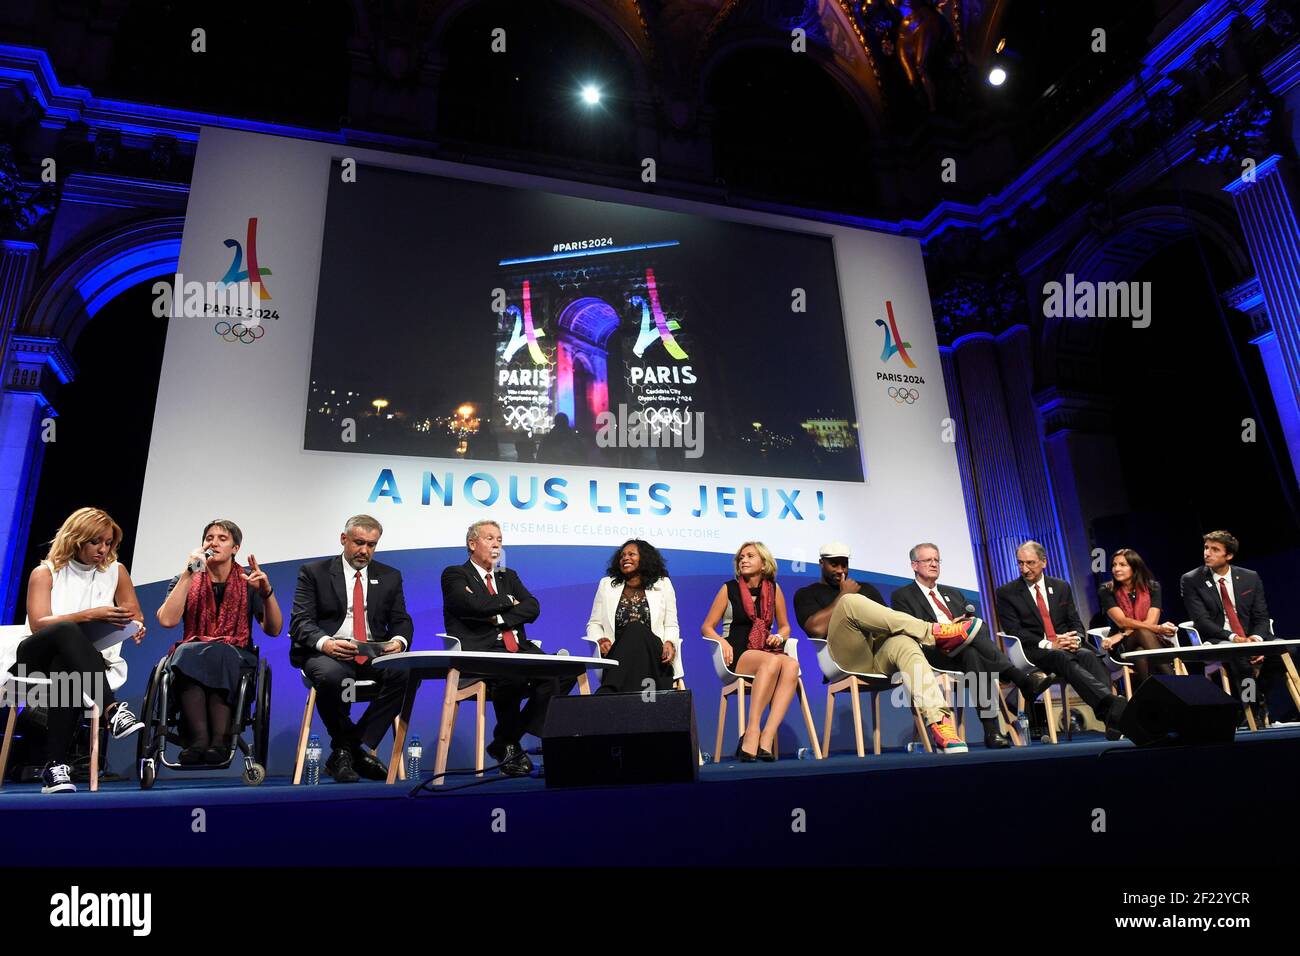 Estelle Mossely, Comité Paralympique et Sportif Français (CPSF) President Emmanuelle Assmann, Paris 2024 Bid CEO and Olympian Etienne Thobois, French IOC Member Guy Drut, French Minister for Sports and two-time Olympic gold medallist Laura Flessel, President of the Ile-de-France Valerie Precresse, two-time Olympic Judoka champion Teddy Riner, Comité National Olympique et Sportif Français (CNOSF) President Denis Masseglia, Paris Mayor Anne Hidalgo and Paris 2024 Bid Co-Chair and 3-time Olympic Champion Tony Estanguet during the reception in honor of the French delegation Paris 2024, City Hall, Stock Photo